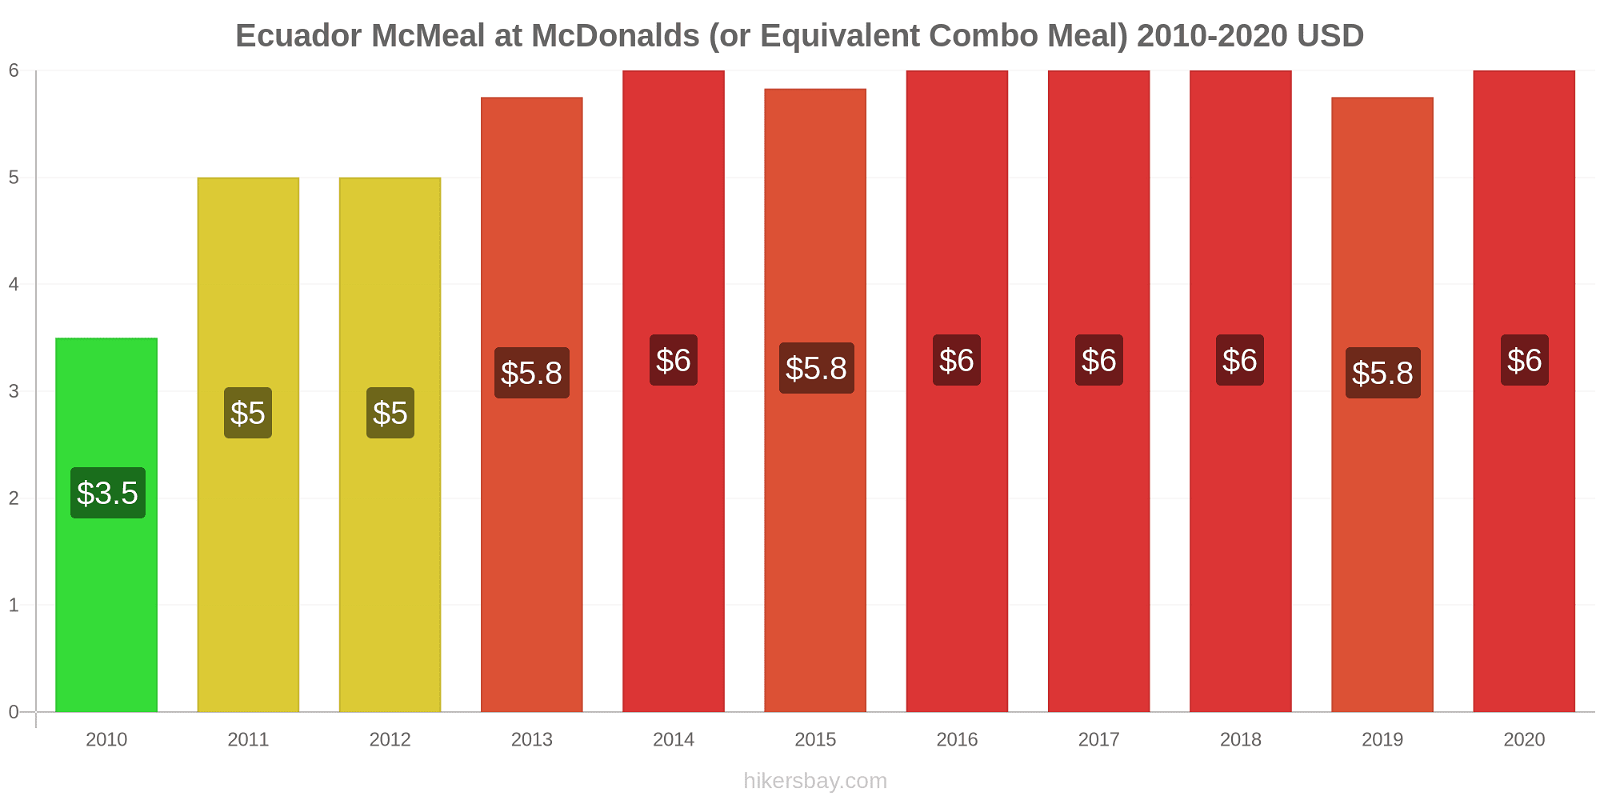 Ecuador price changes McMeal at McDonalds (or Equivalent Combo Meal) hikersbay.com